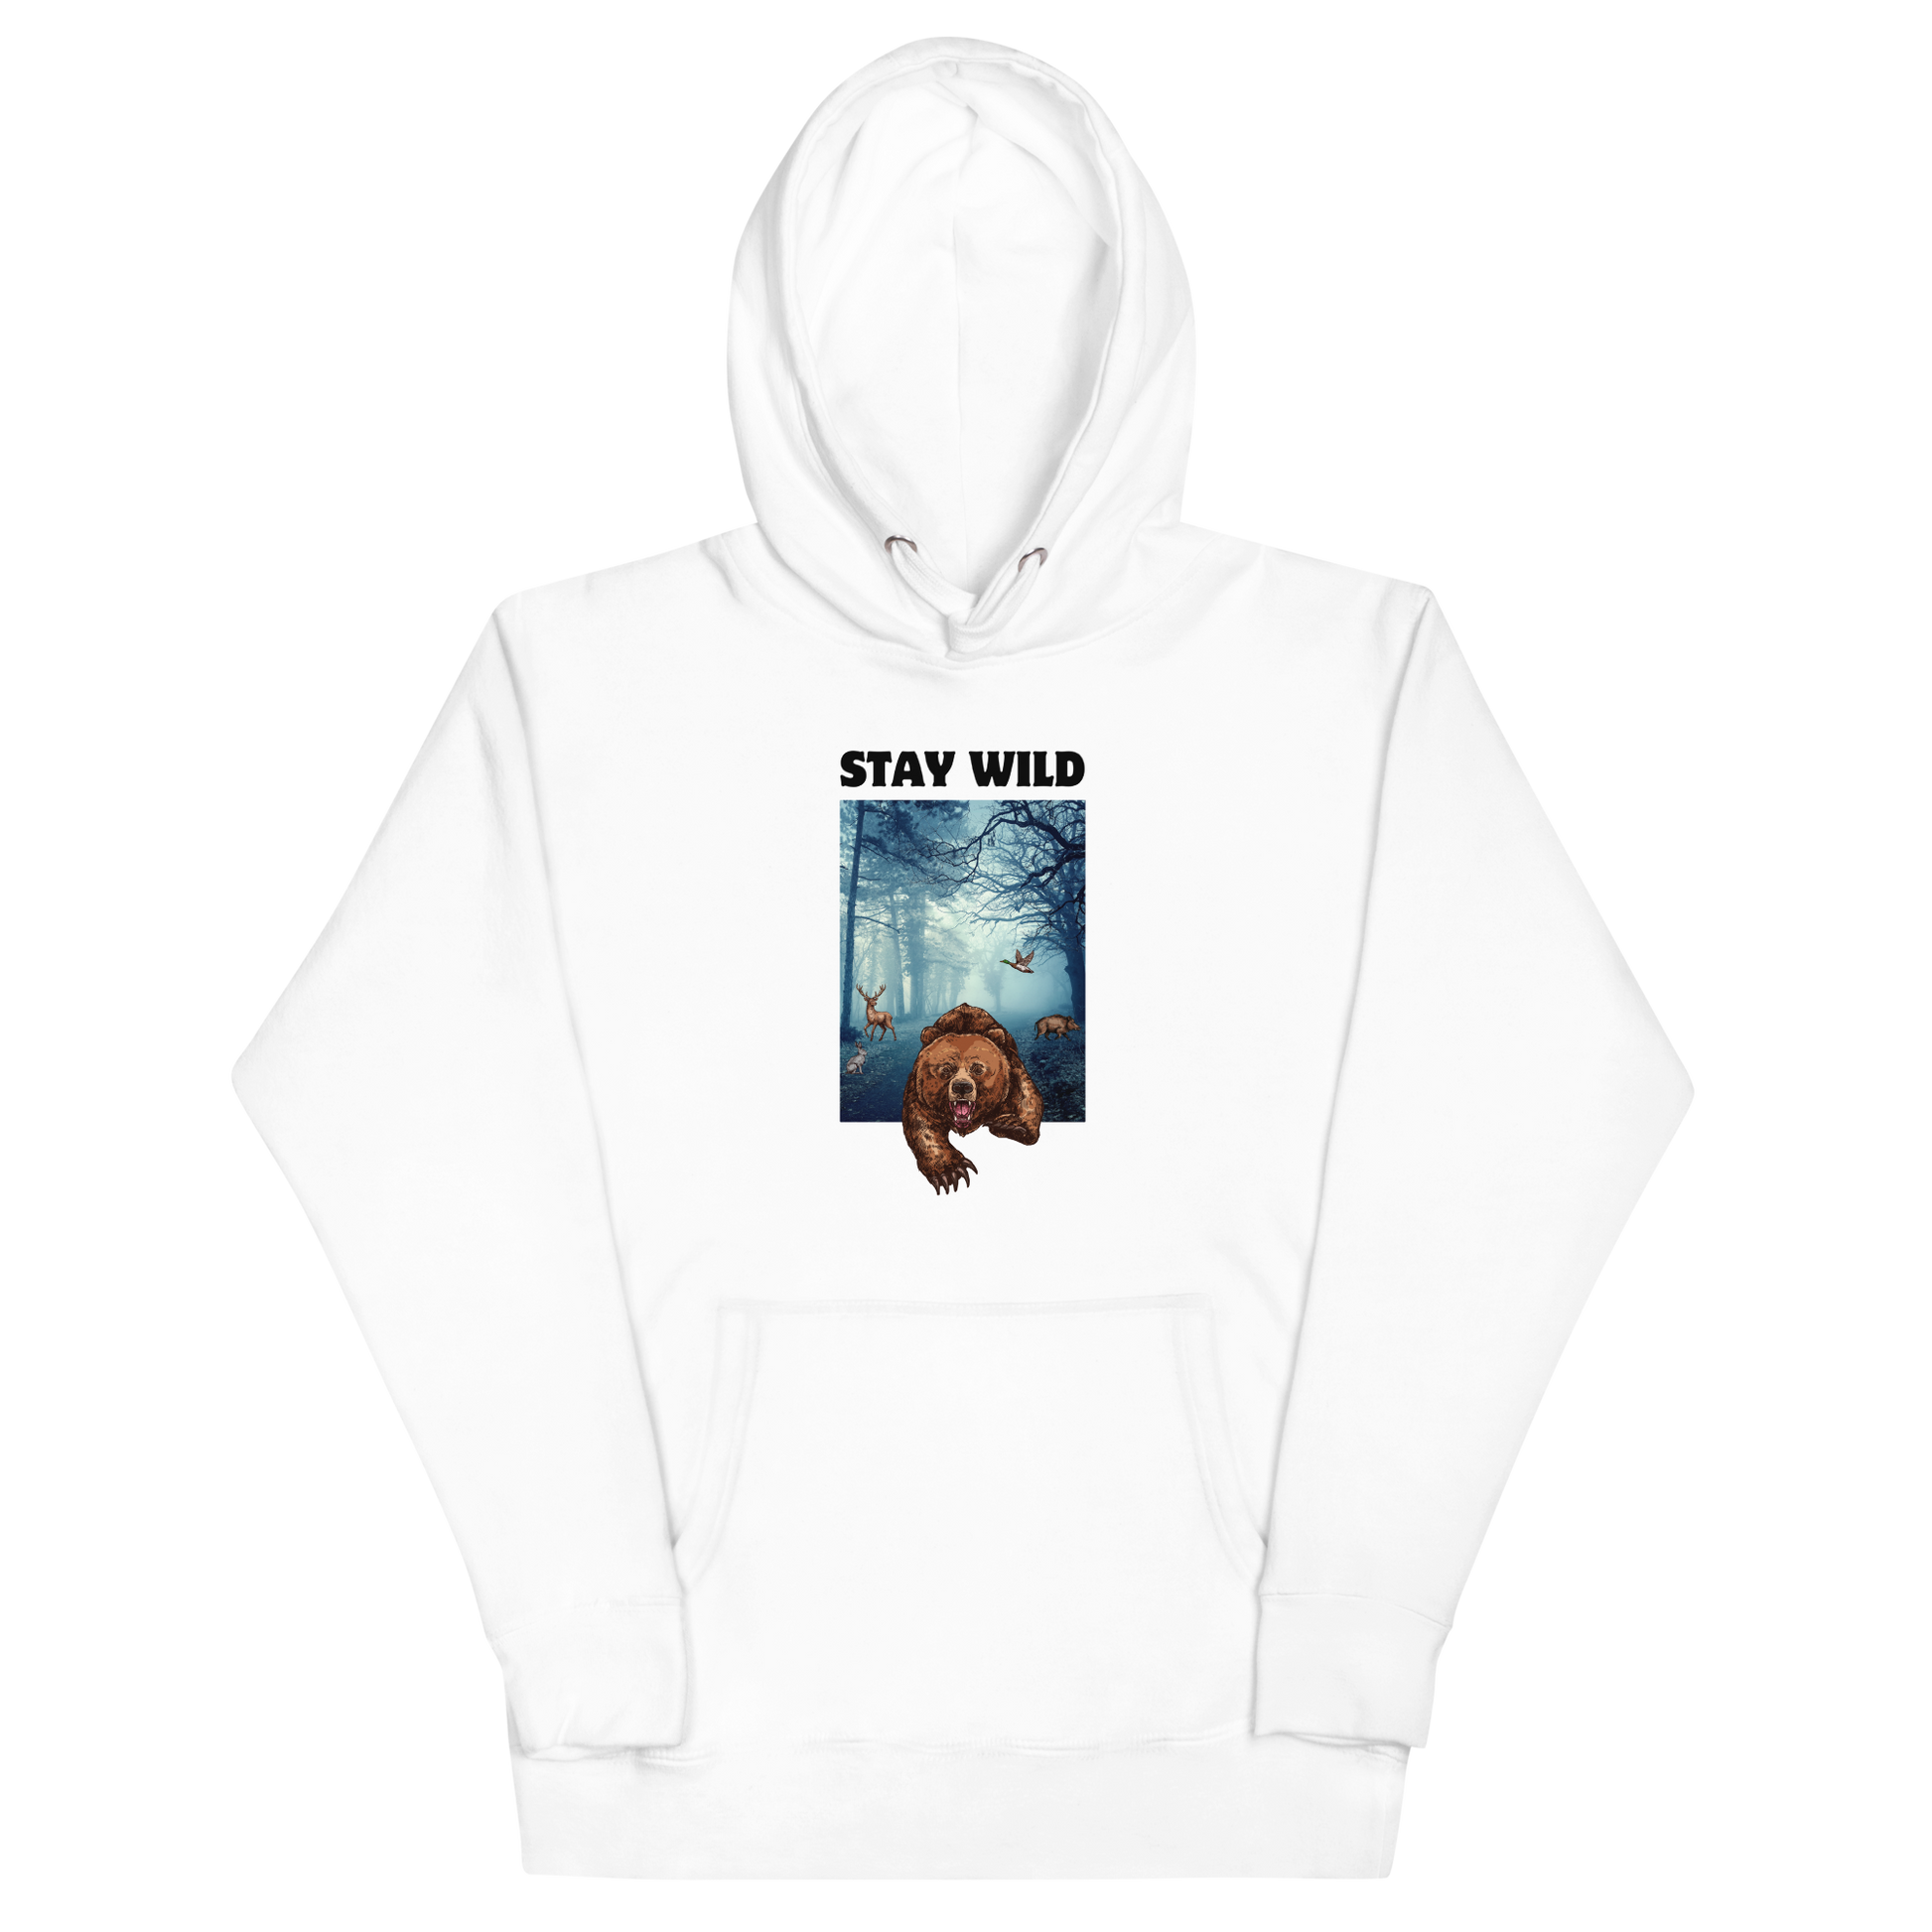 White Premium Bear Hoodie featuring a Stay Wild graphic on the chest - Cool Graphic Bear Hoodies - Boozy Fox